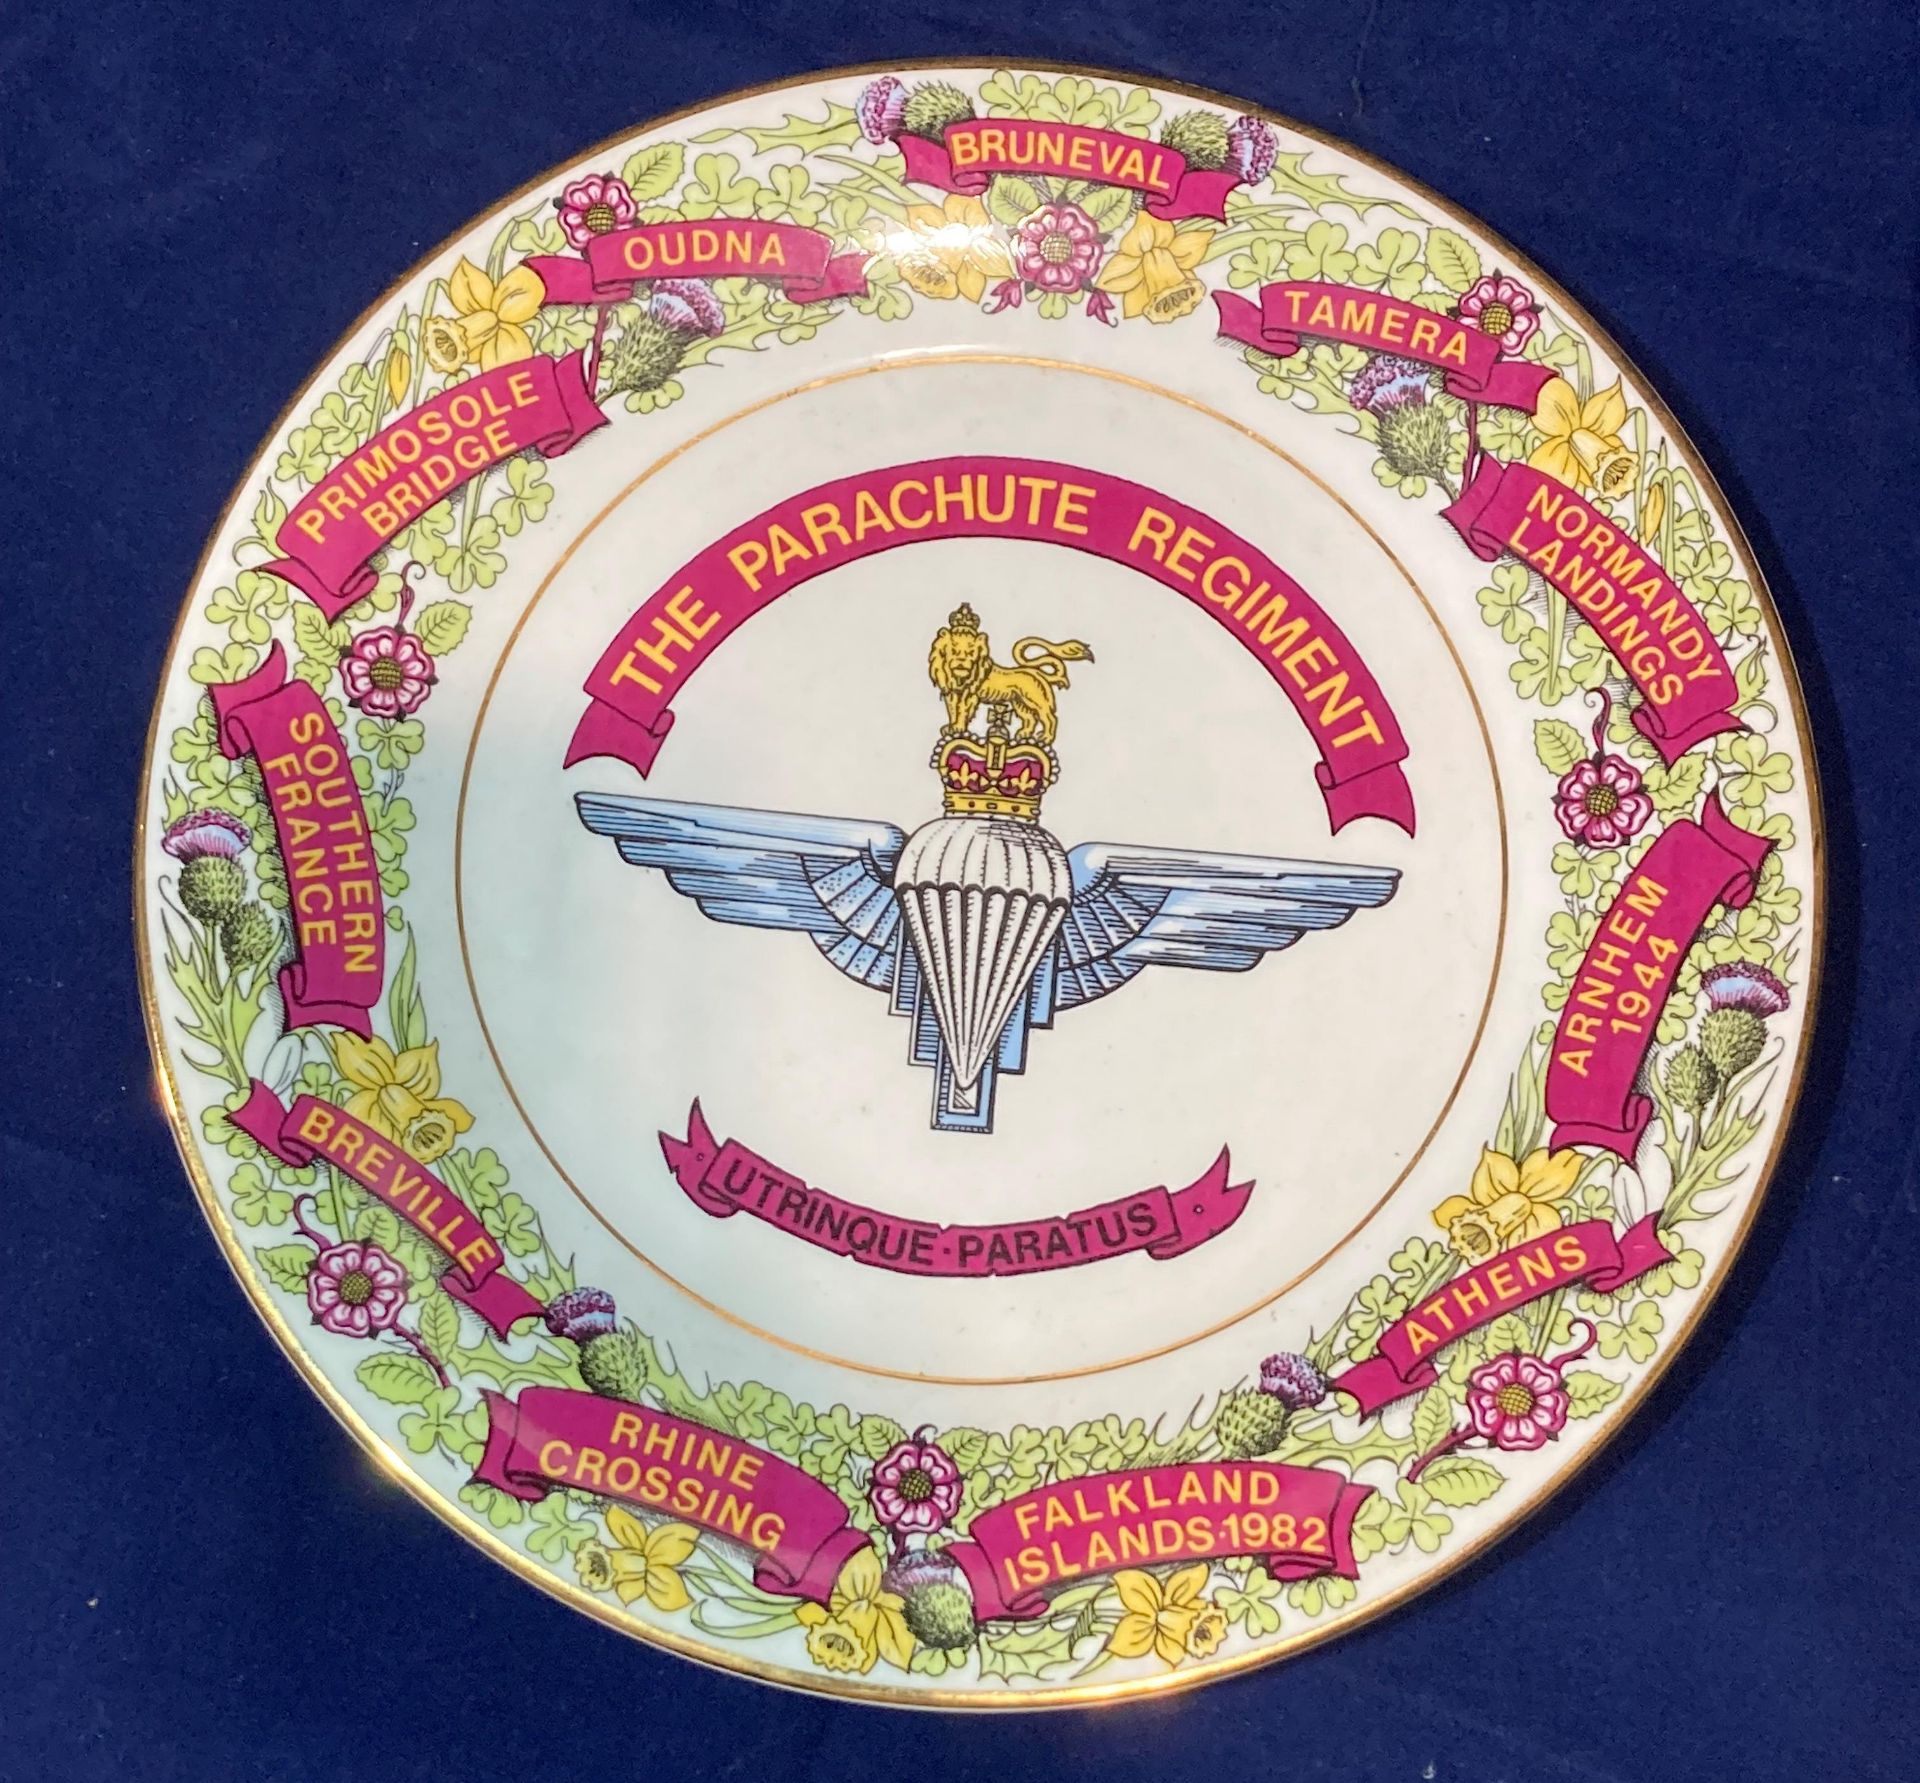 Edwardian fine bone china limited edition plate specially produced for the Parachute Regiment and